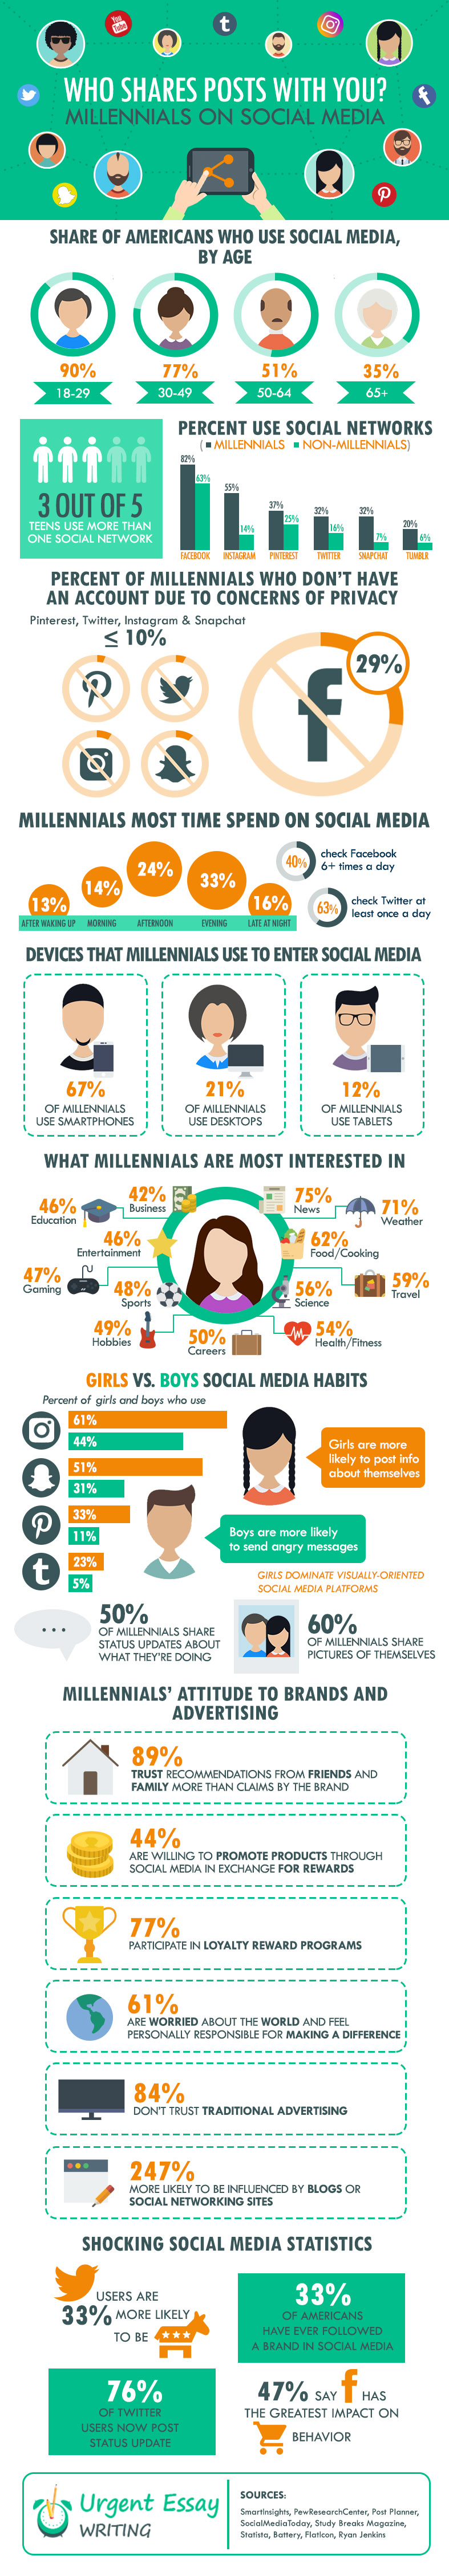 Social-Graphics | Millenials on Social Media Interesting Statistics and Facts #infographic